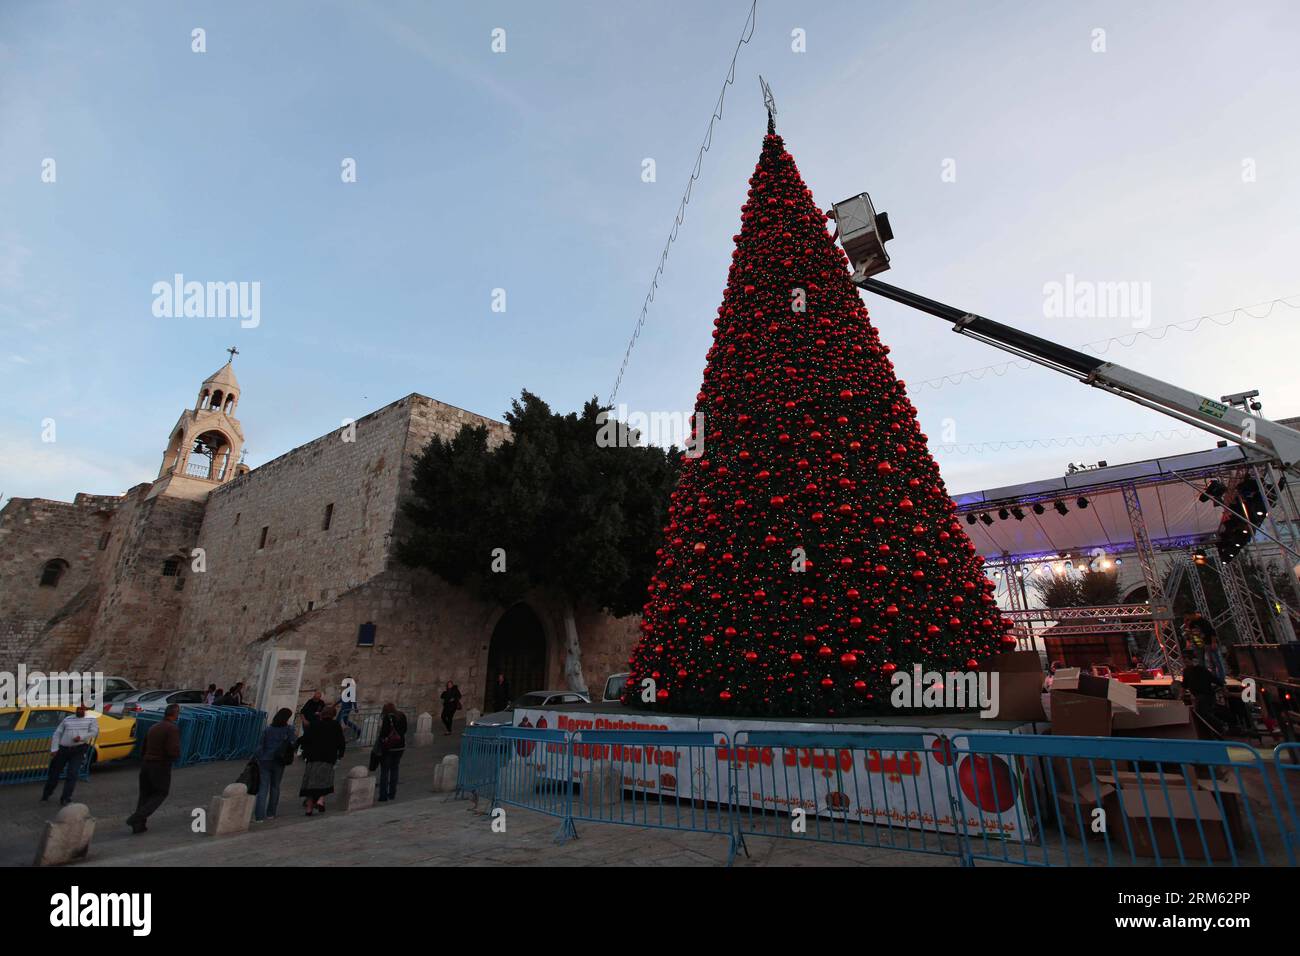 Bildnummer: 60775422  Datum: 30.11.2013  Copyright: imago/Xinhua     Workers decorate a huge Christmas tree erected near the Church of the Nativity in the West Bank city of Bethlehem on Nov. 30, 2013. (Xinhua/Luay Sababa) MIDEAST-BETHLEHEM-CHRISTMAS TREE PUBLICATIONxNOTxINxCHN xcb x0x 2013 quer Stock Photo